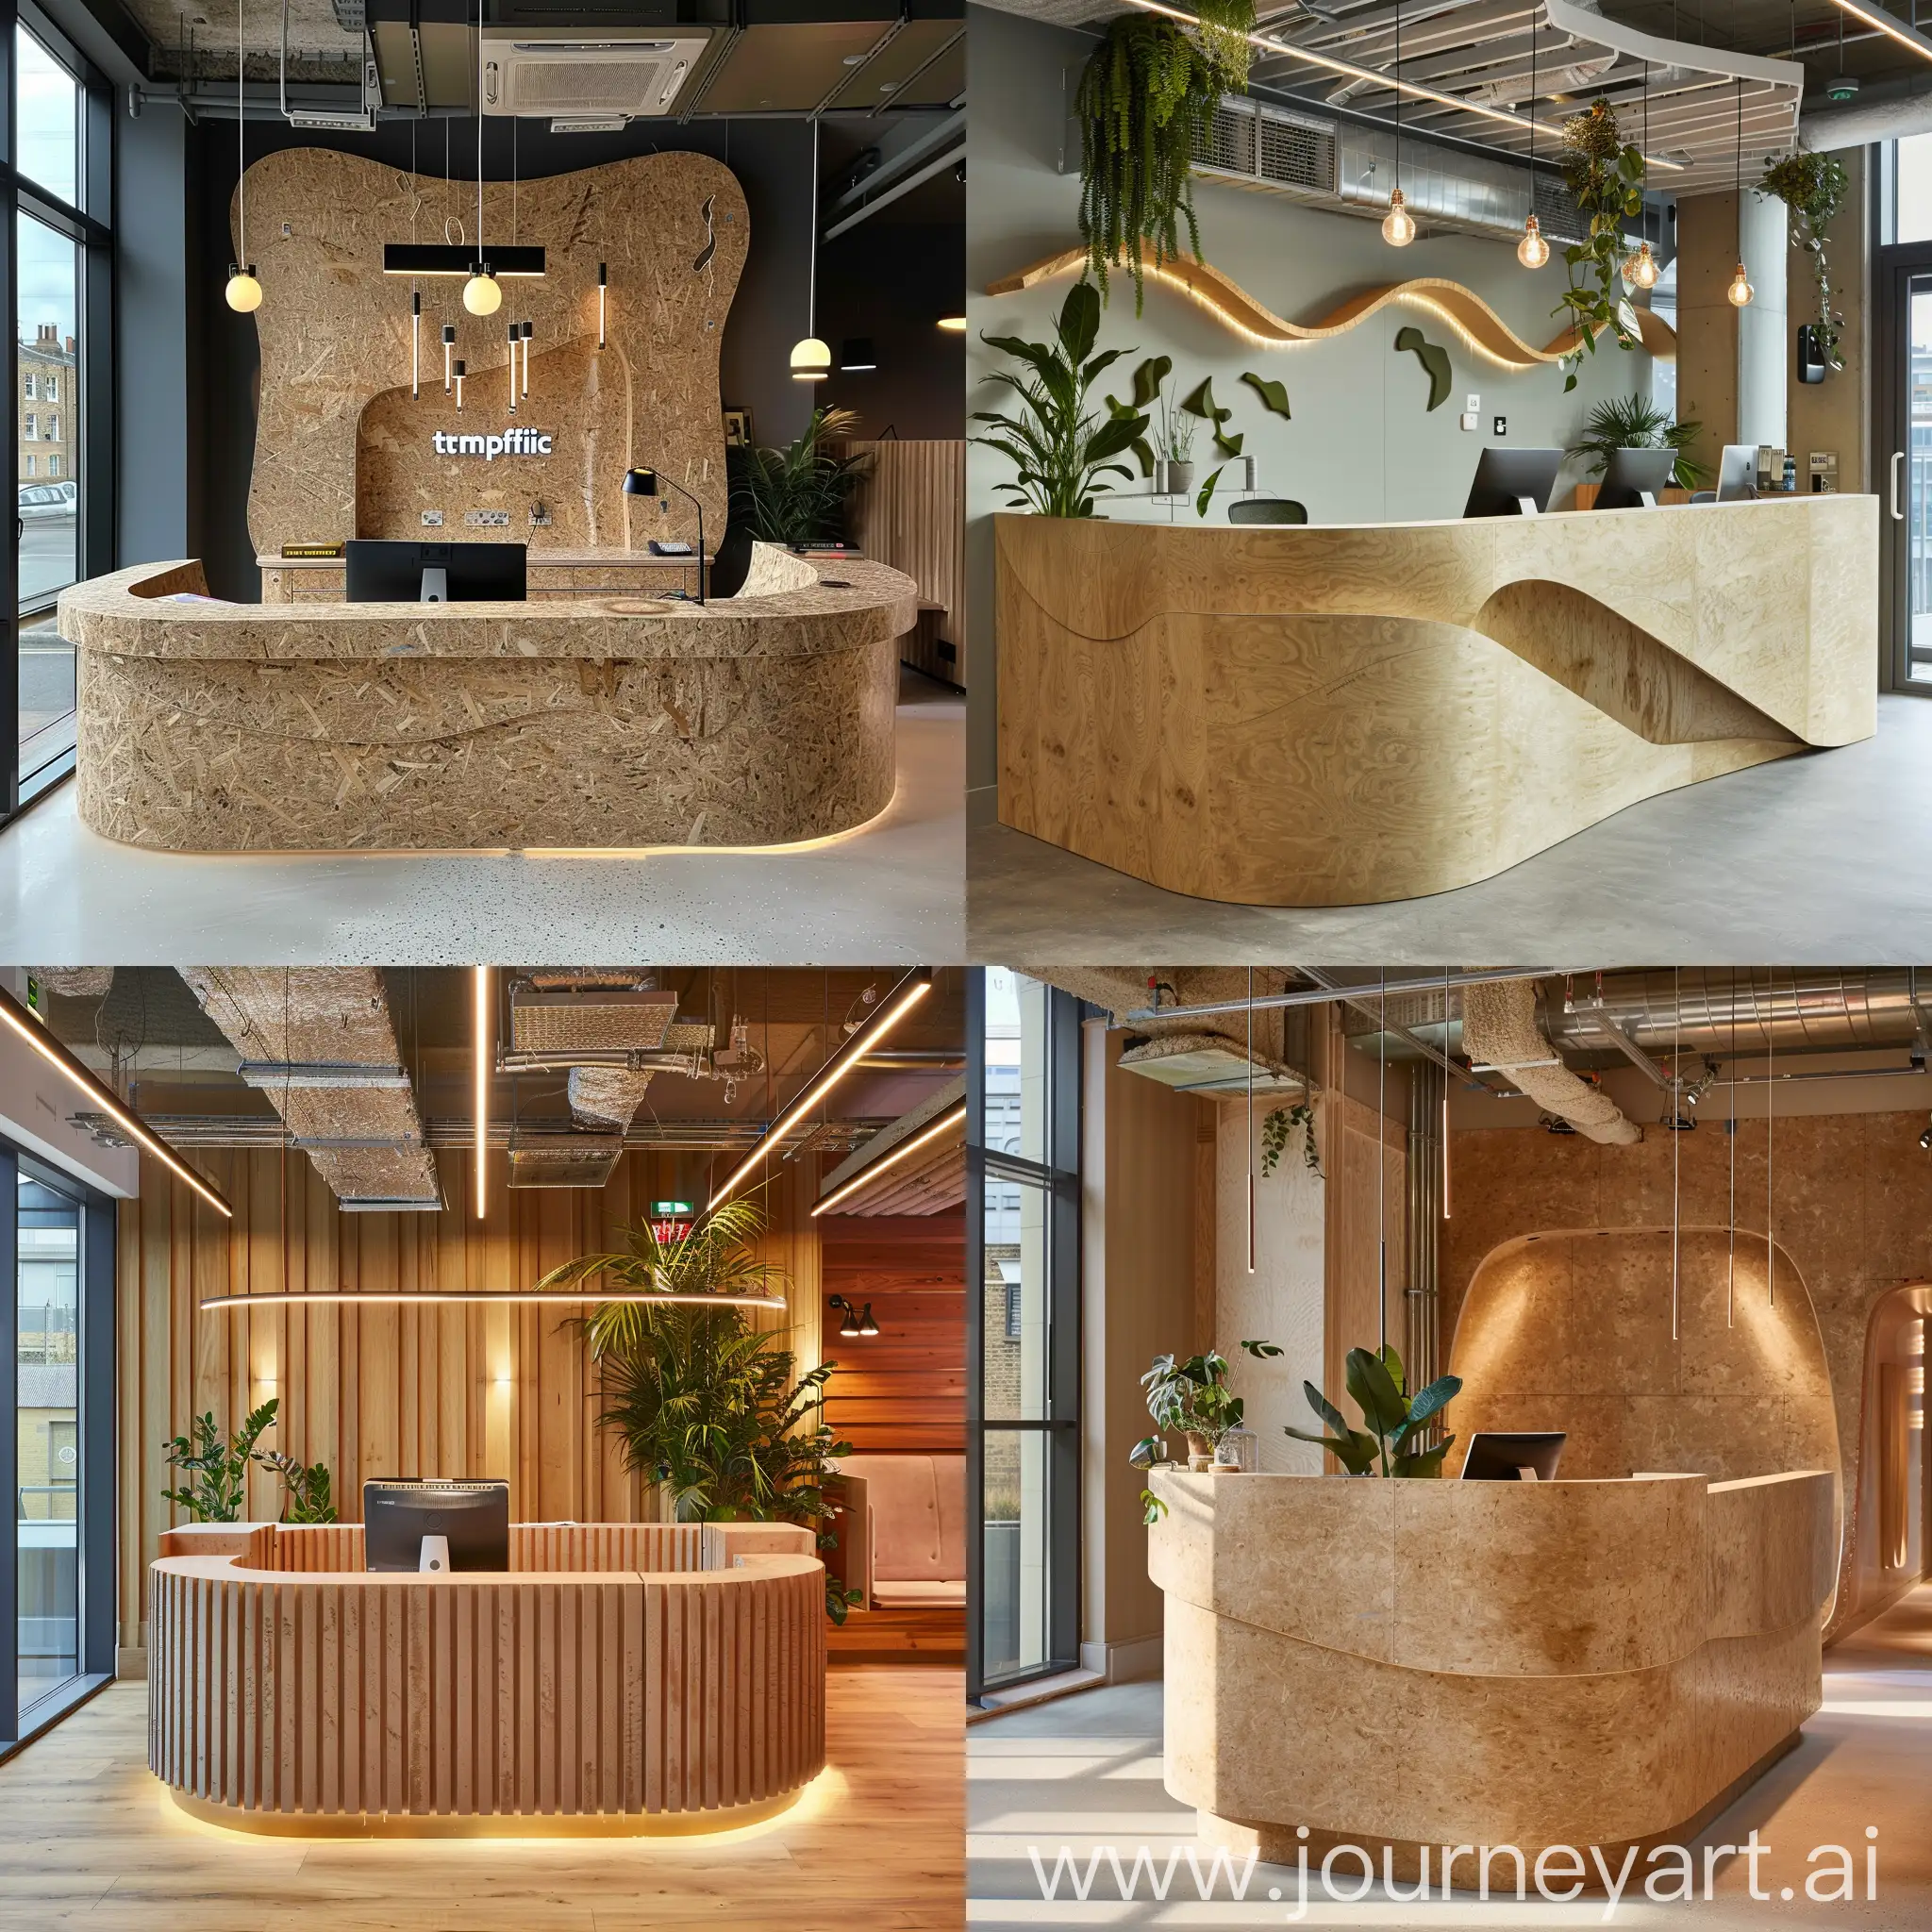 reception desk using unique and sustainable materials that is inspired by east london and trustpilots brand